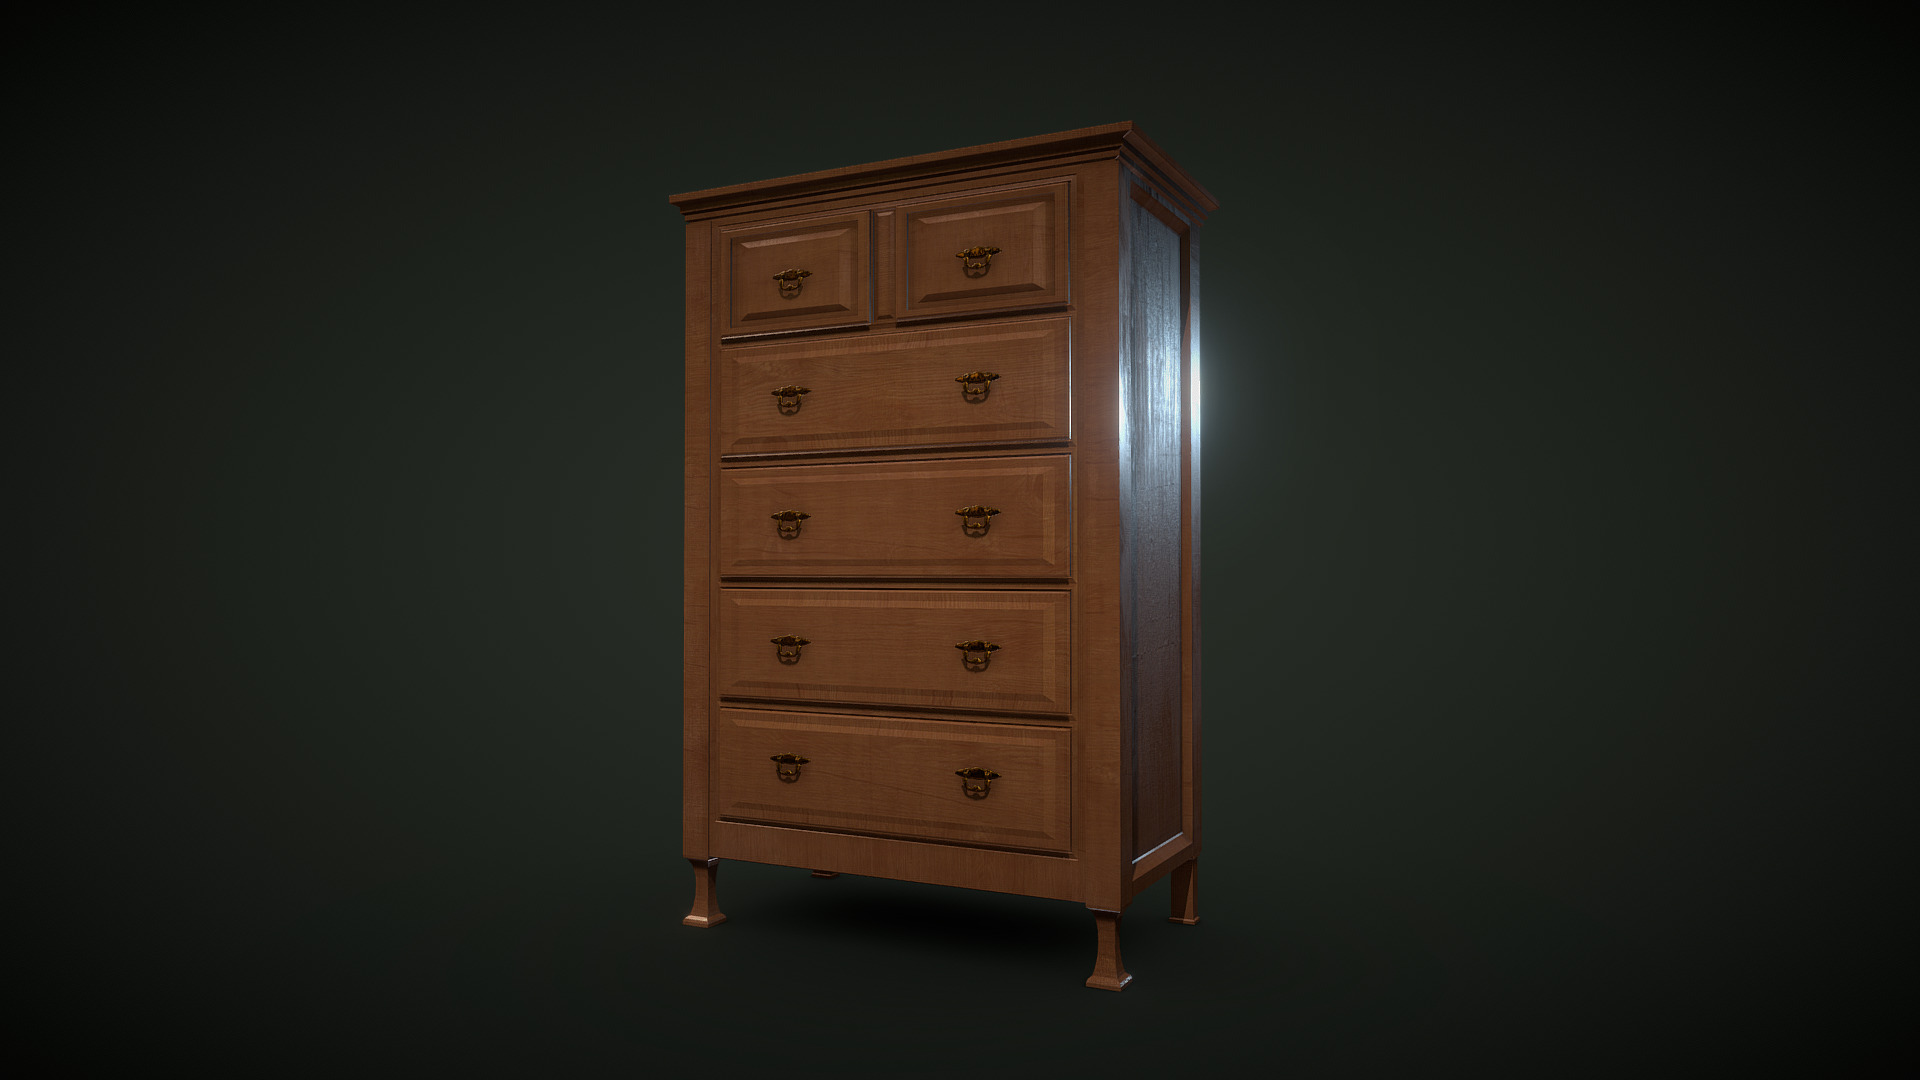 3D model Antique Drawer - This is a 3D model of the Antique Drawer. The 3D model is about a wooden dresser with drawers.